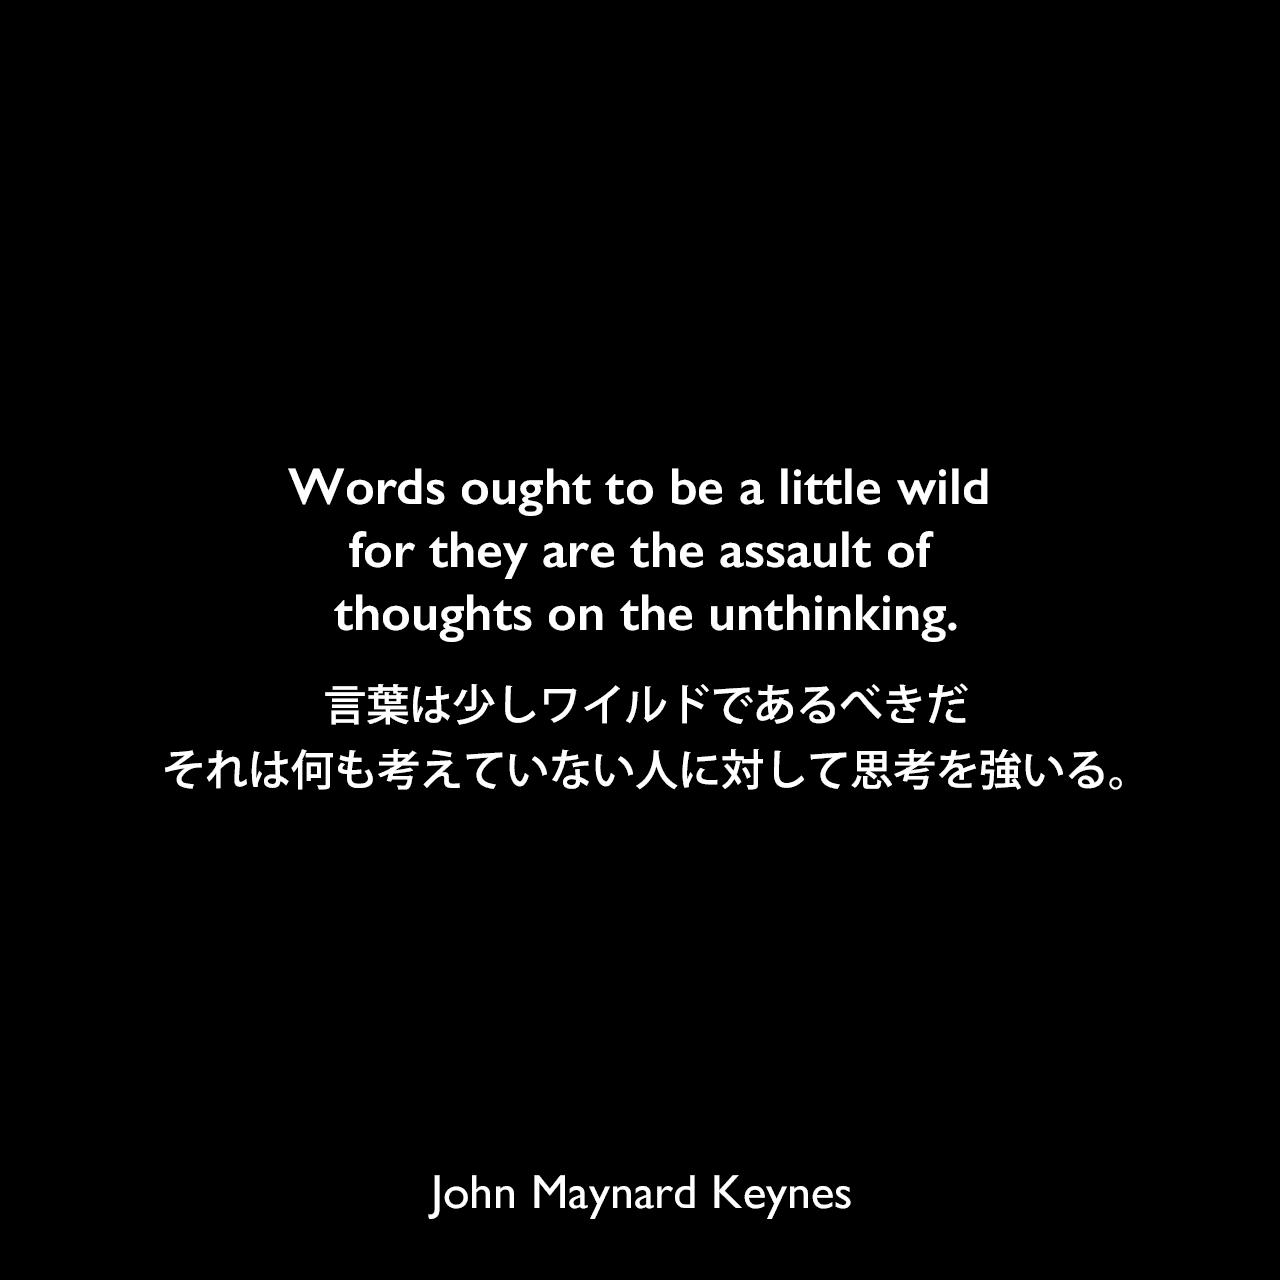 Words ought to be a little wild for they are the assault of thoughts on the unthinking.言葉は少しワイルドであるべきだ、それは何も考えていない人に対して思考を強いる。John Maynard Keynes